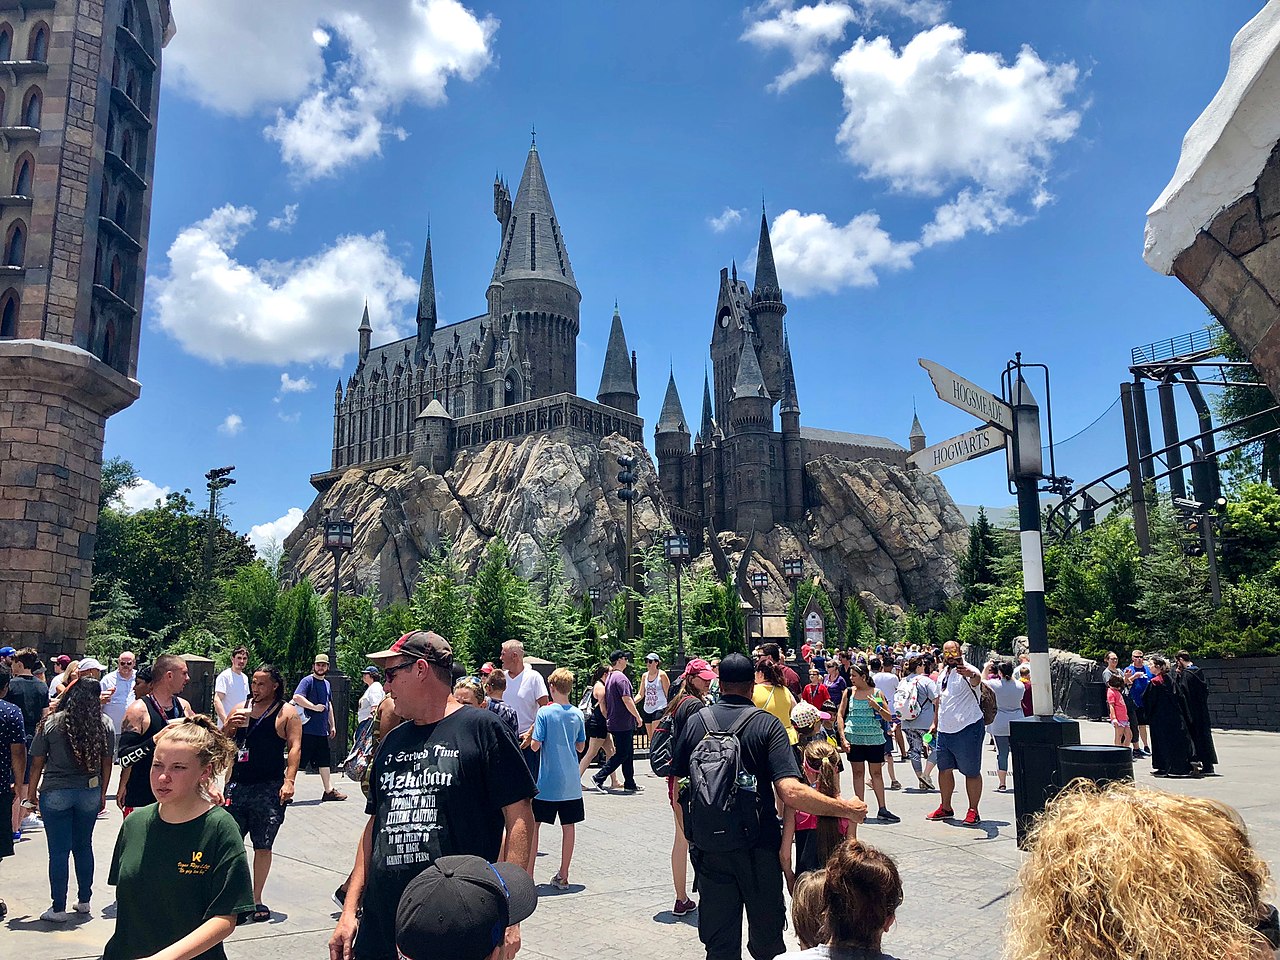 <p>The rides at Universal Studios are some of the best in the world, with everything from thrilling roller coasters to unforgettable <strong>3D and 4D simulator rides</strong>. </p>  <p>The park is also home to the incredible Wizarding World of Harry Potter, where visitors can explore Hogsmeade Village and board the Hogwarts Express.</p>